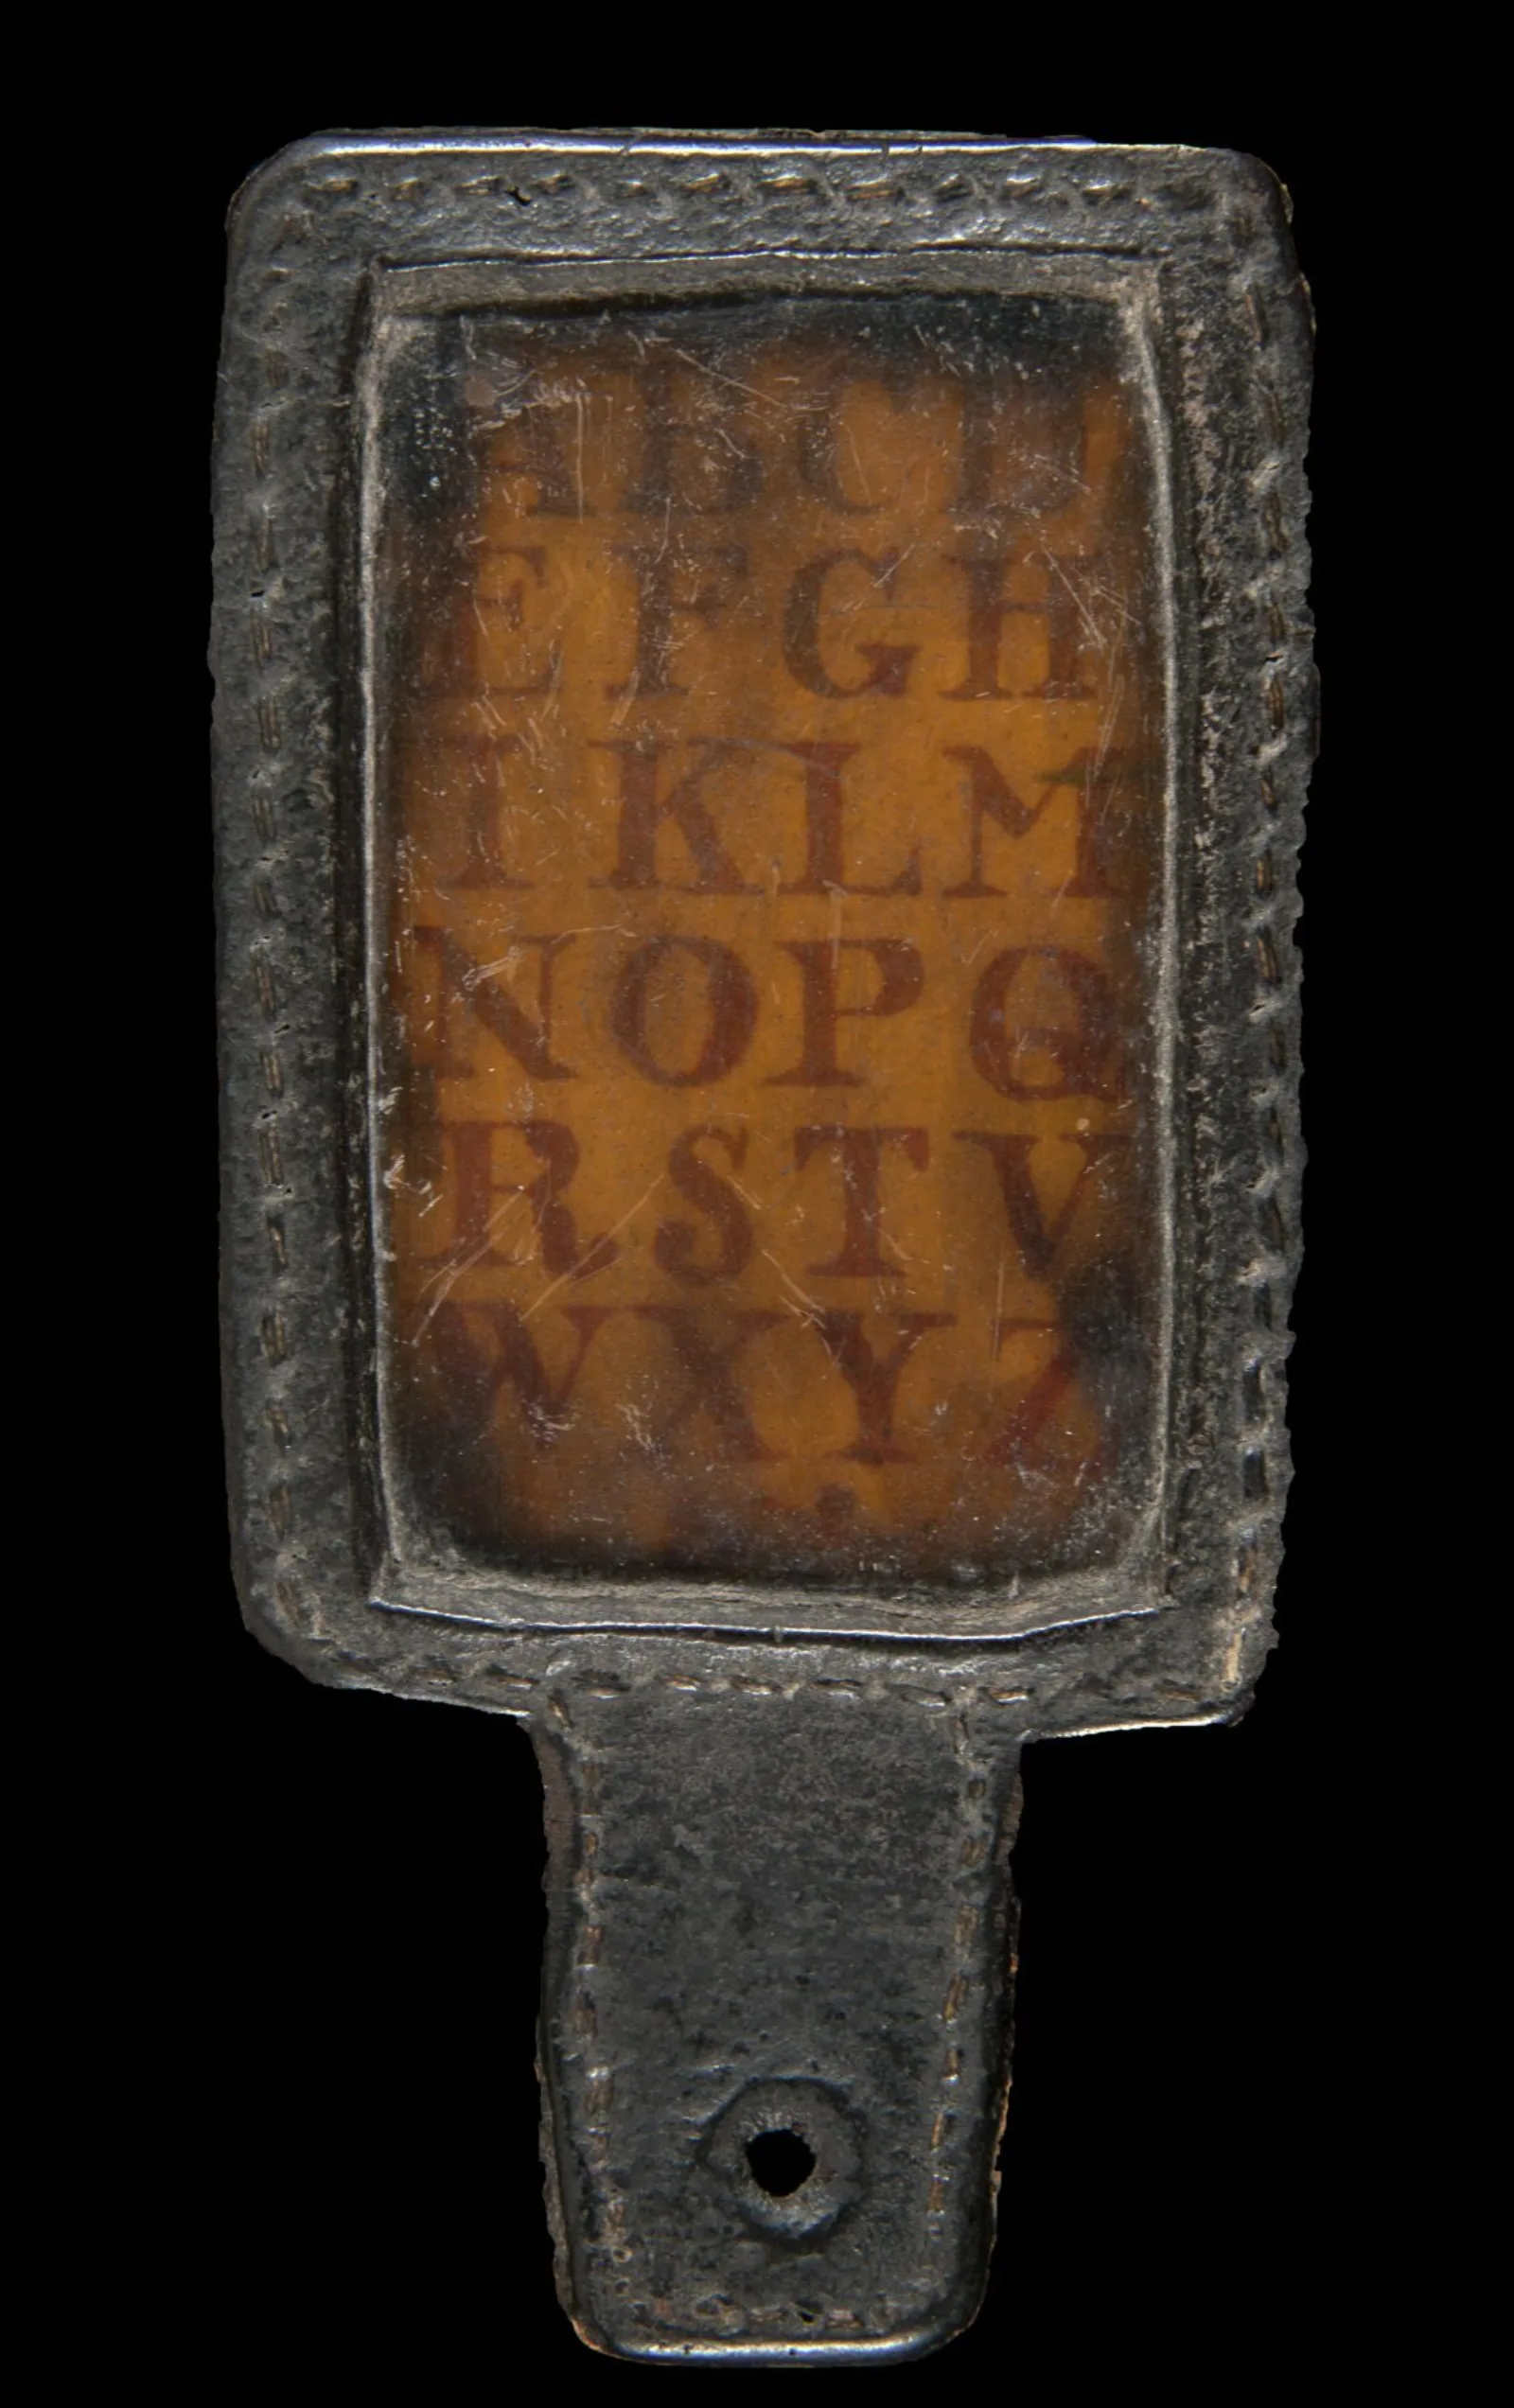 A small wooden paddle has a transparent screen running vertically. Under the screen is the alphabet. At the base of the paddle is a small hole.